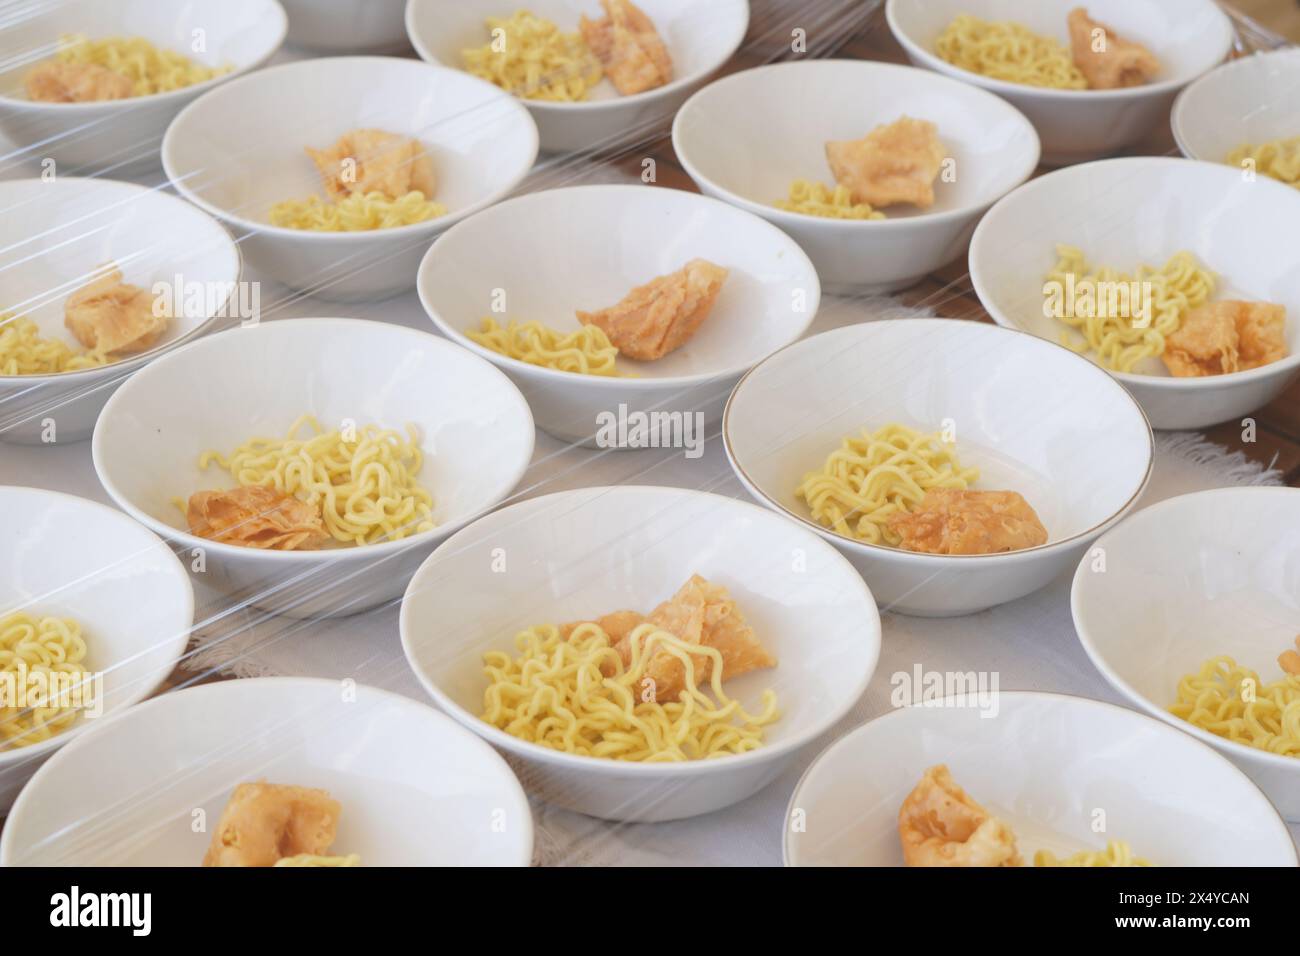 Several white bowls containing yellow noodles, fried foods and meatballs without sauce on the table Stock Photo